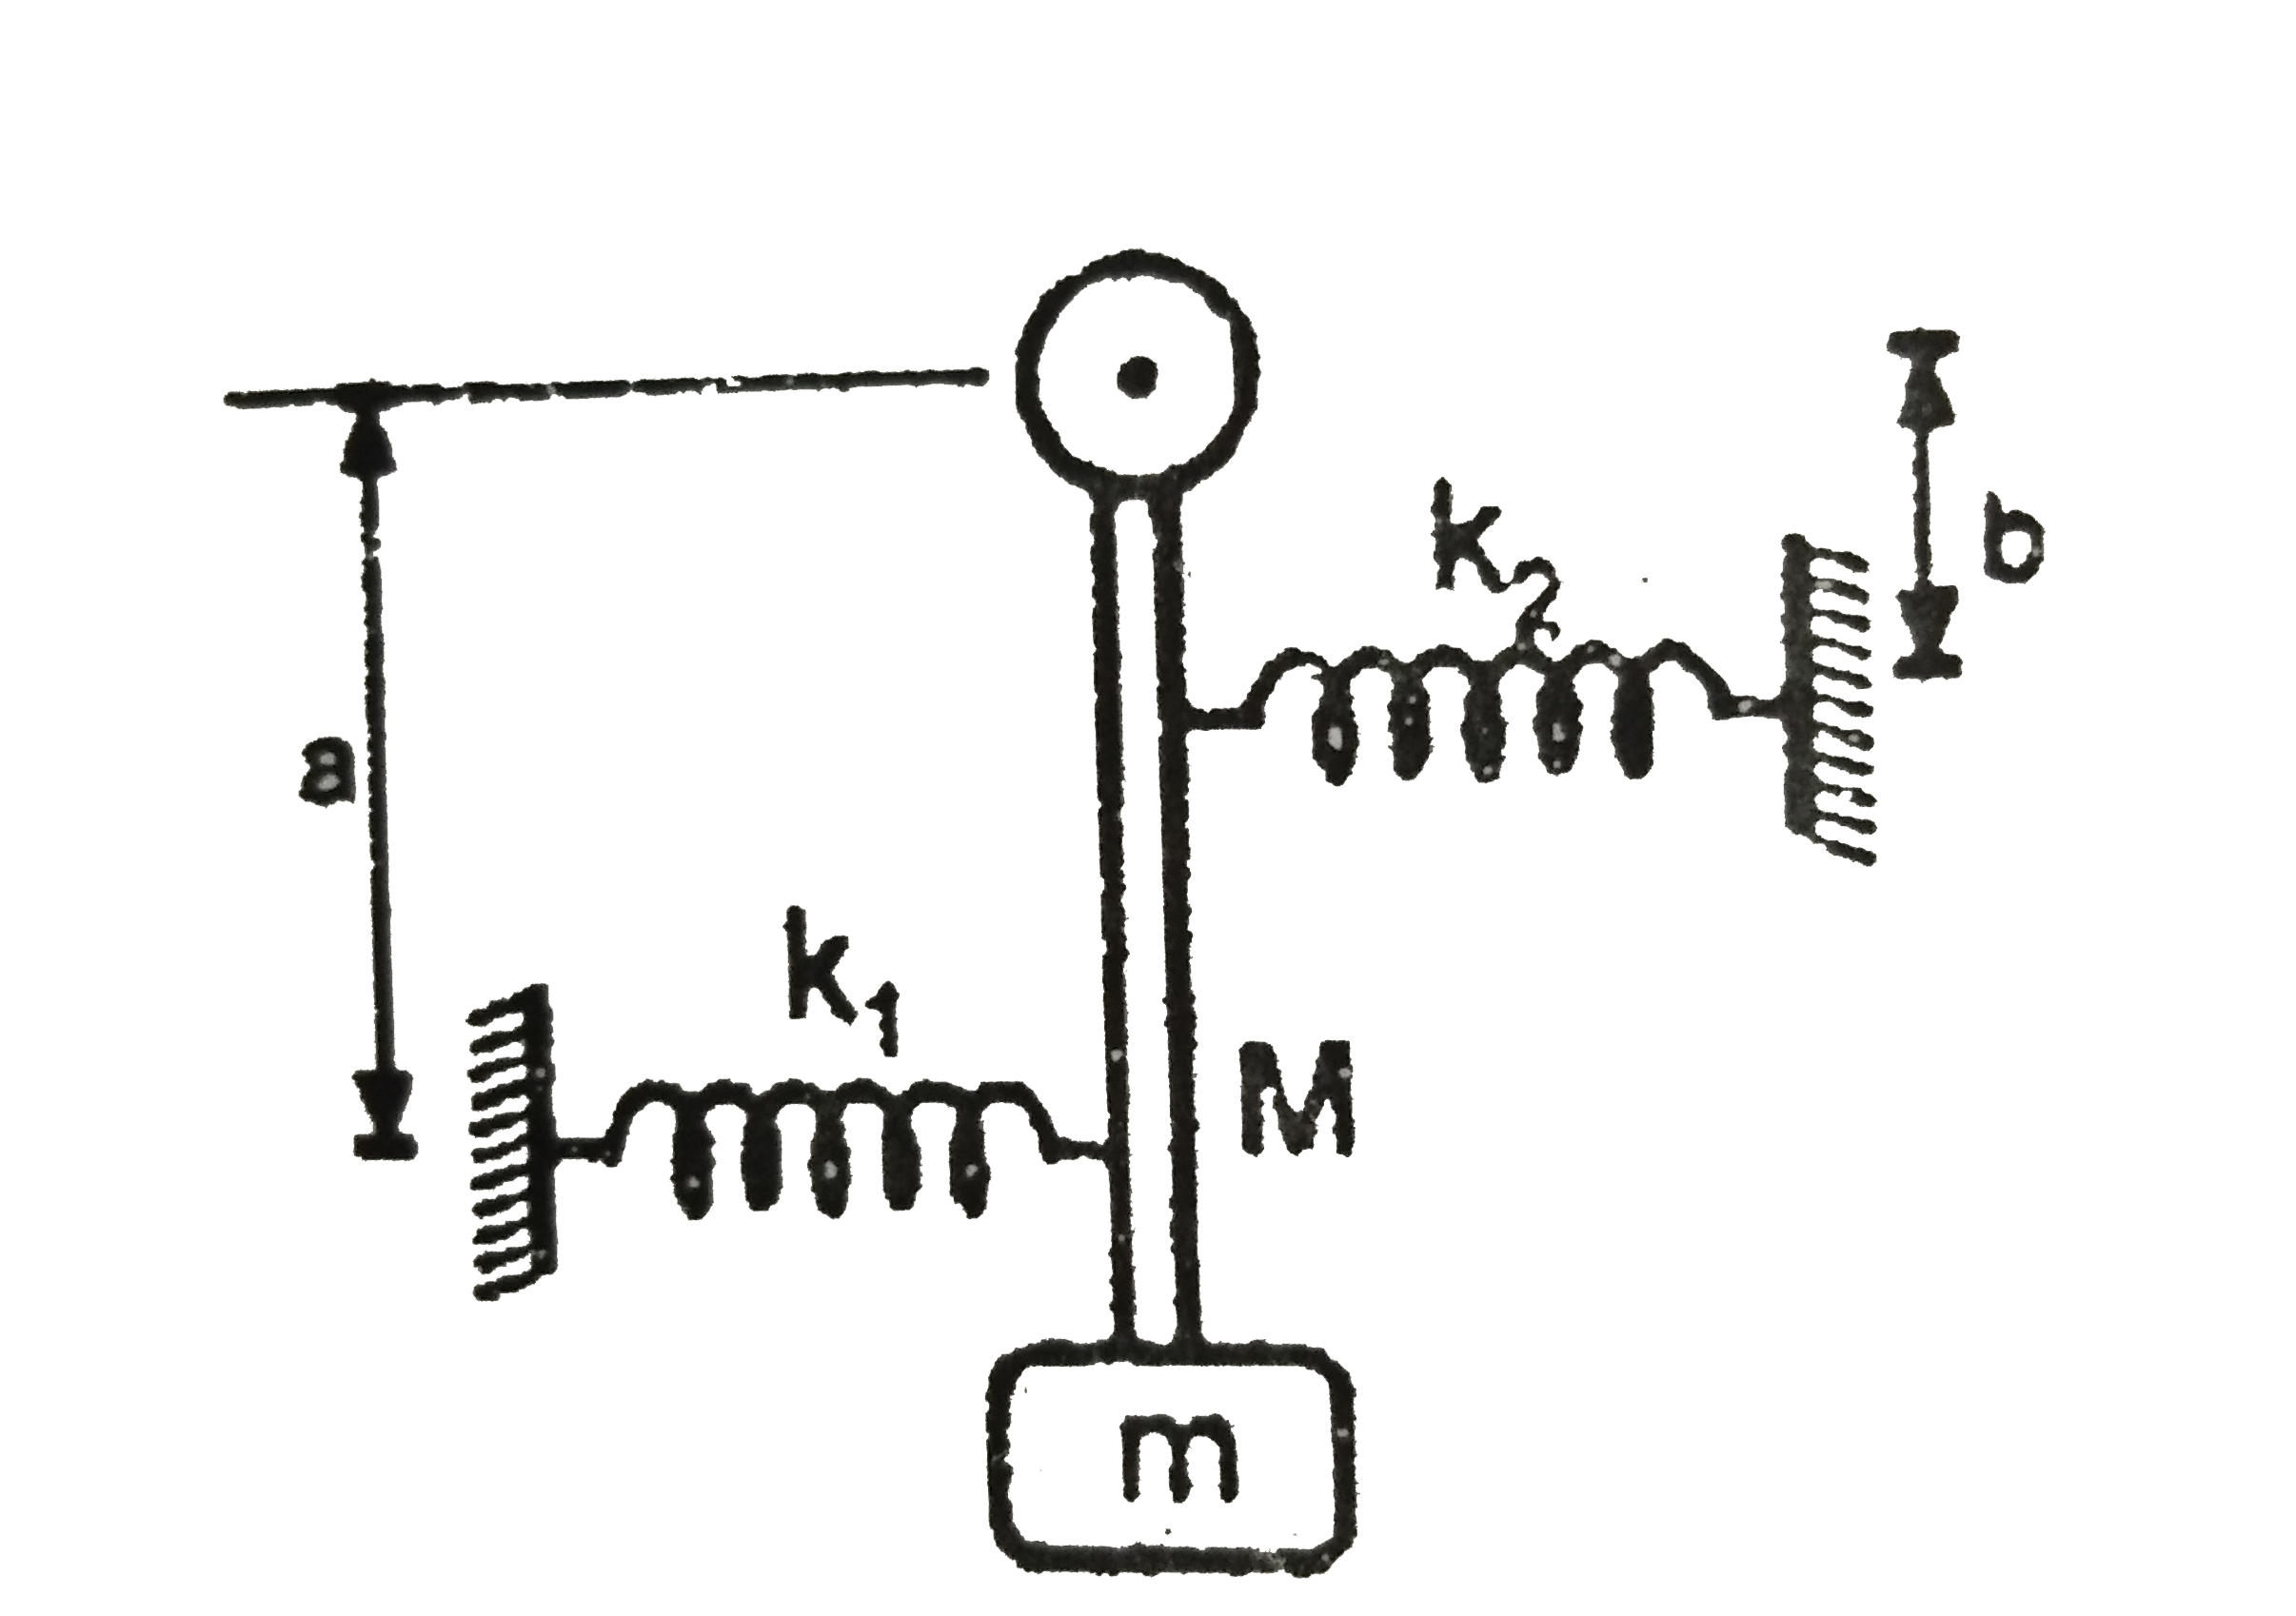 A rod of mass M and length K is hinged at its one end n carris a block f mass m at its other end. A spring of force constant k(1) is installed at distance a form the hinge and another of force constant k(2) at a distance b as shown in the figure. If the whole arrangement rests on a smoth horizontal table top. Find the frequency of vibrations.